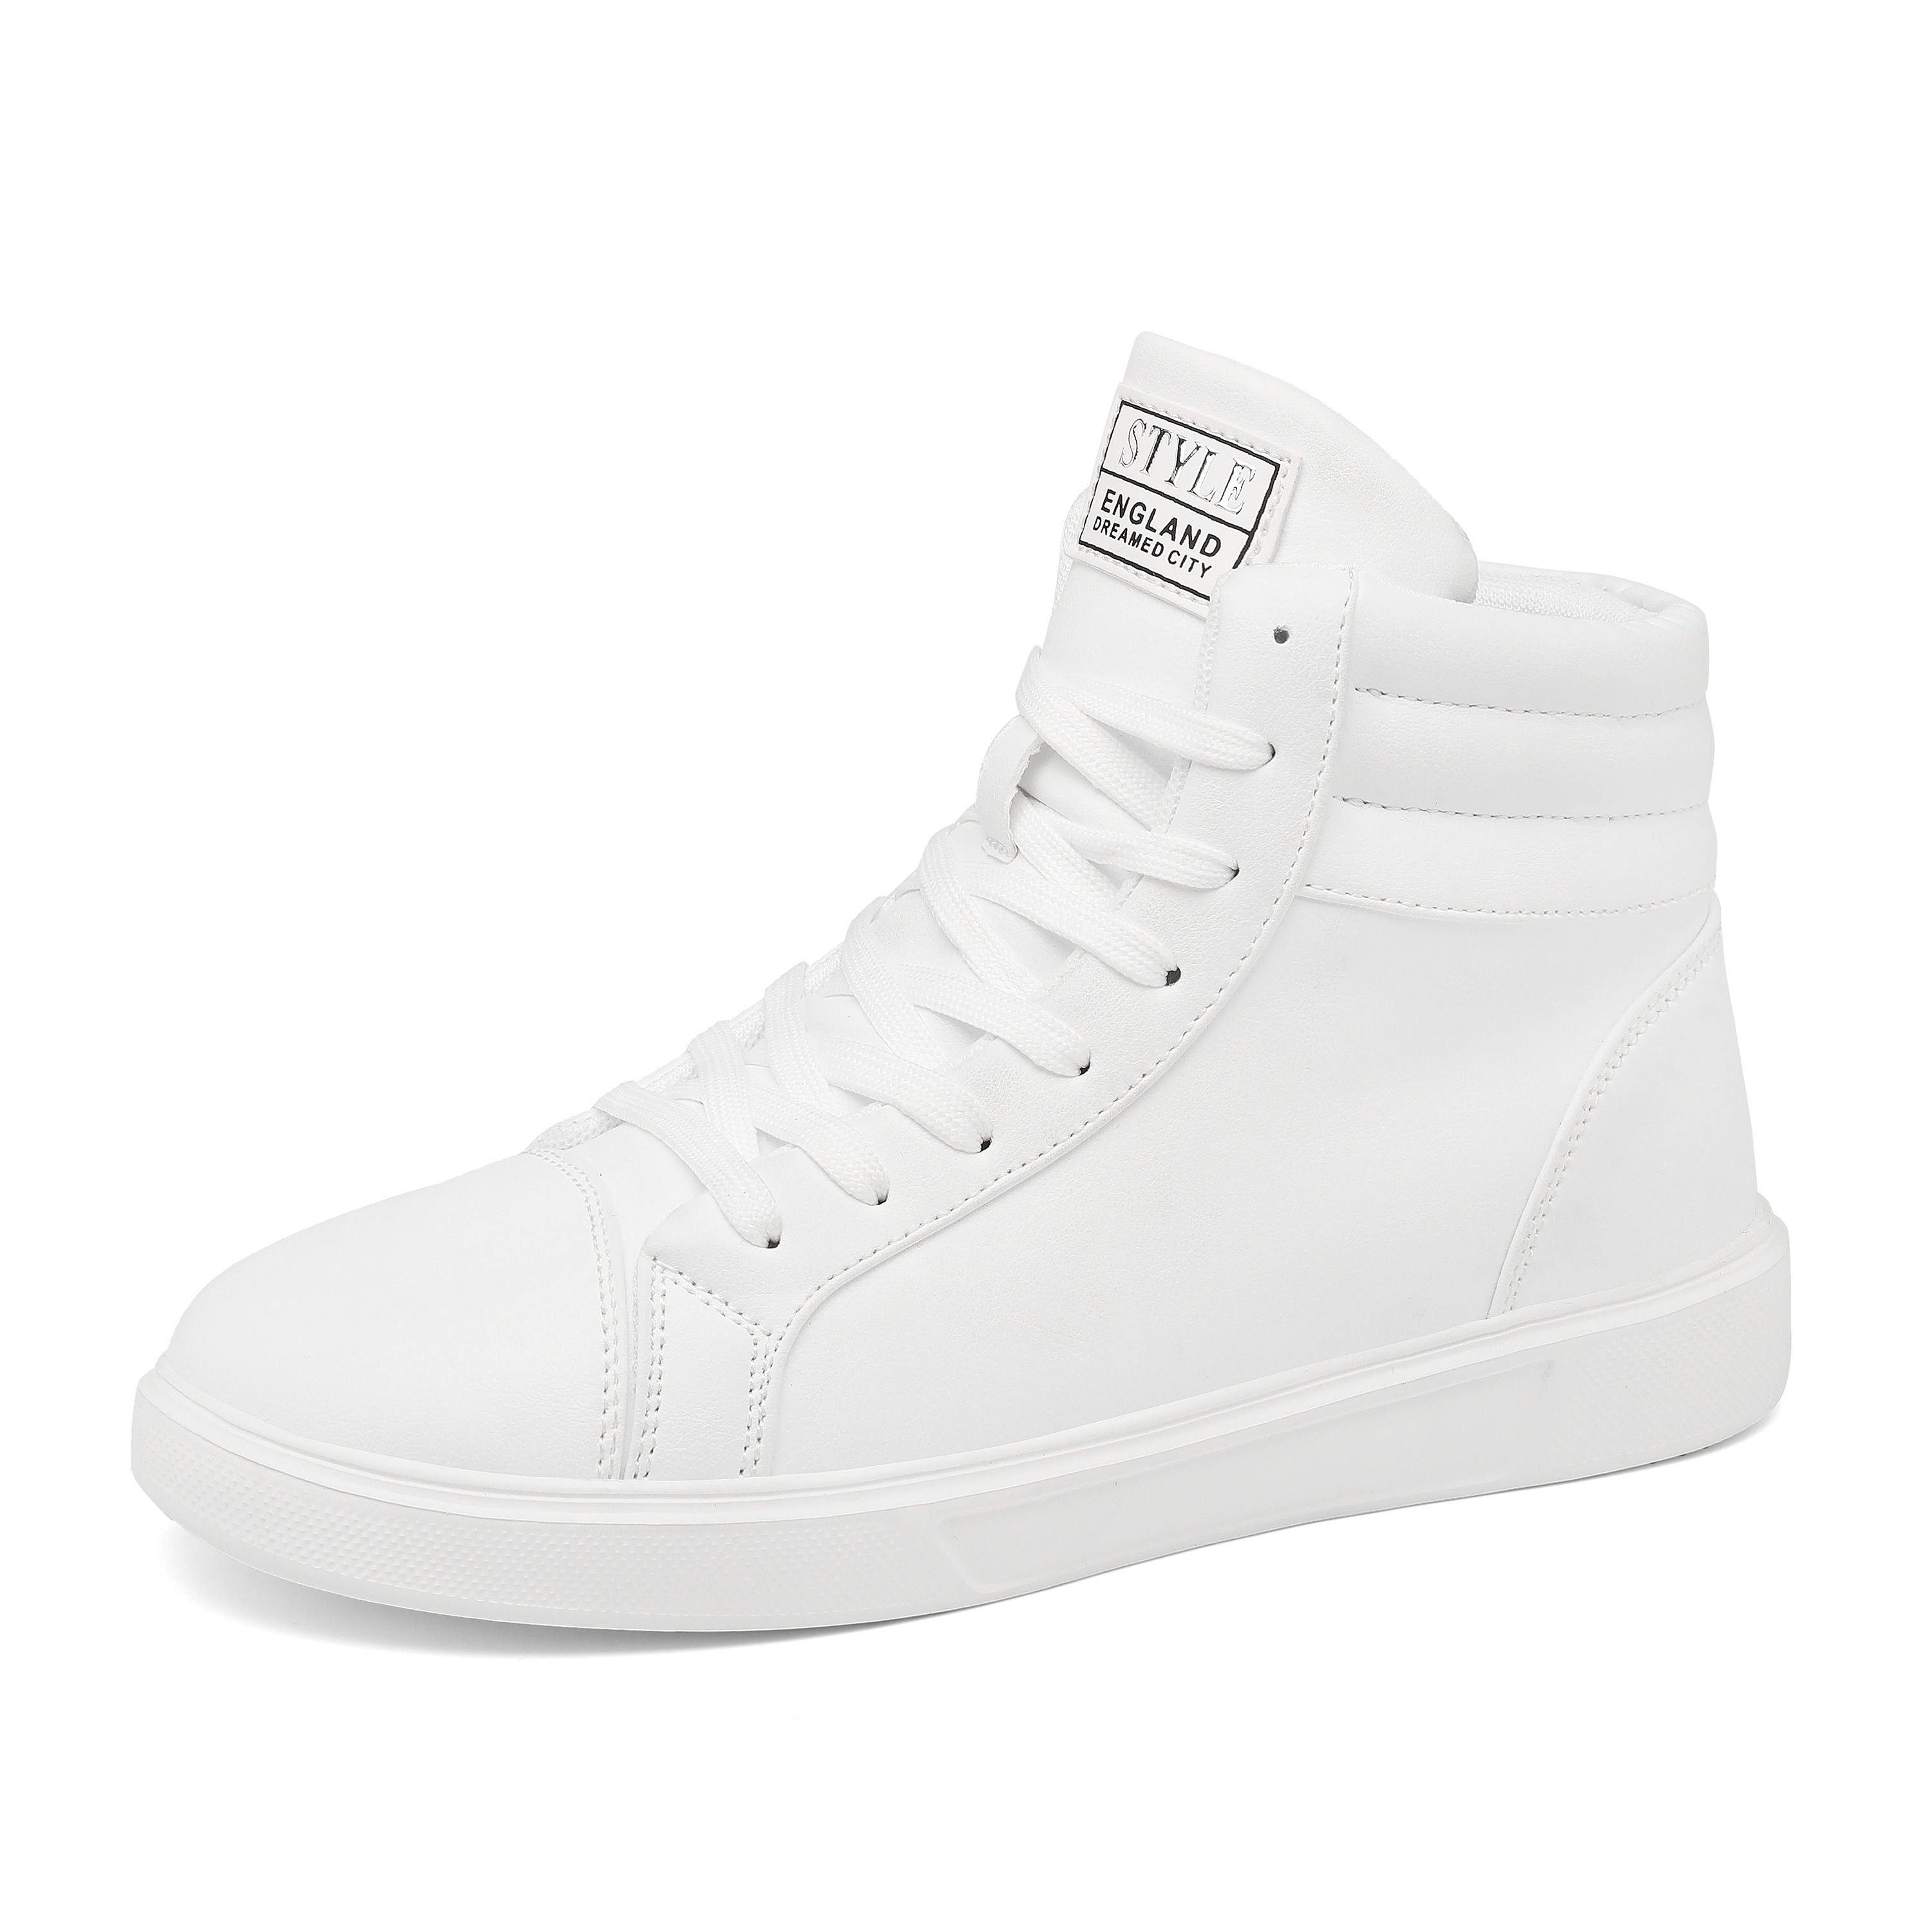 

High-top White Sneakers, Breathable Synthetic Leather, Lace-up Casual Shoes, Streetwear Fashion, Unisex Design, Durable Outsoles, Comfort Fit